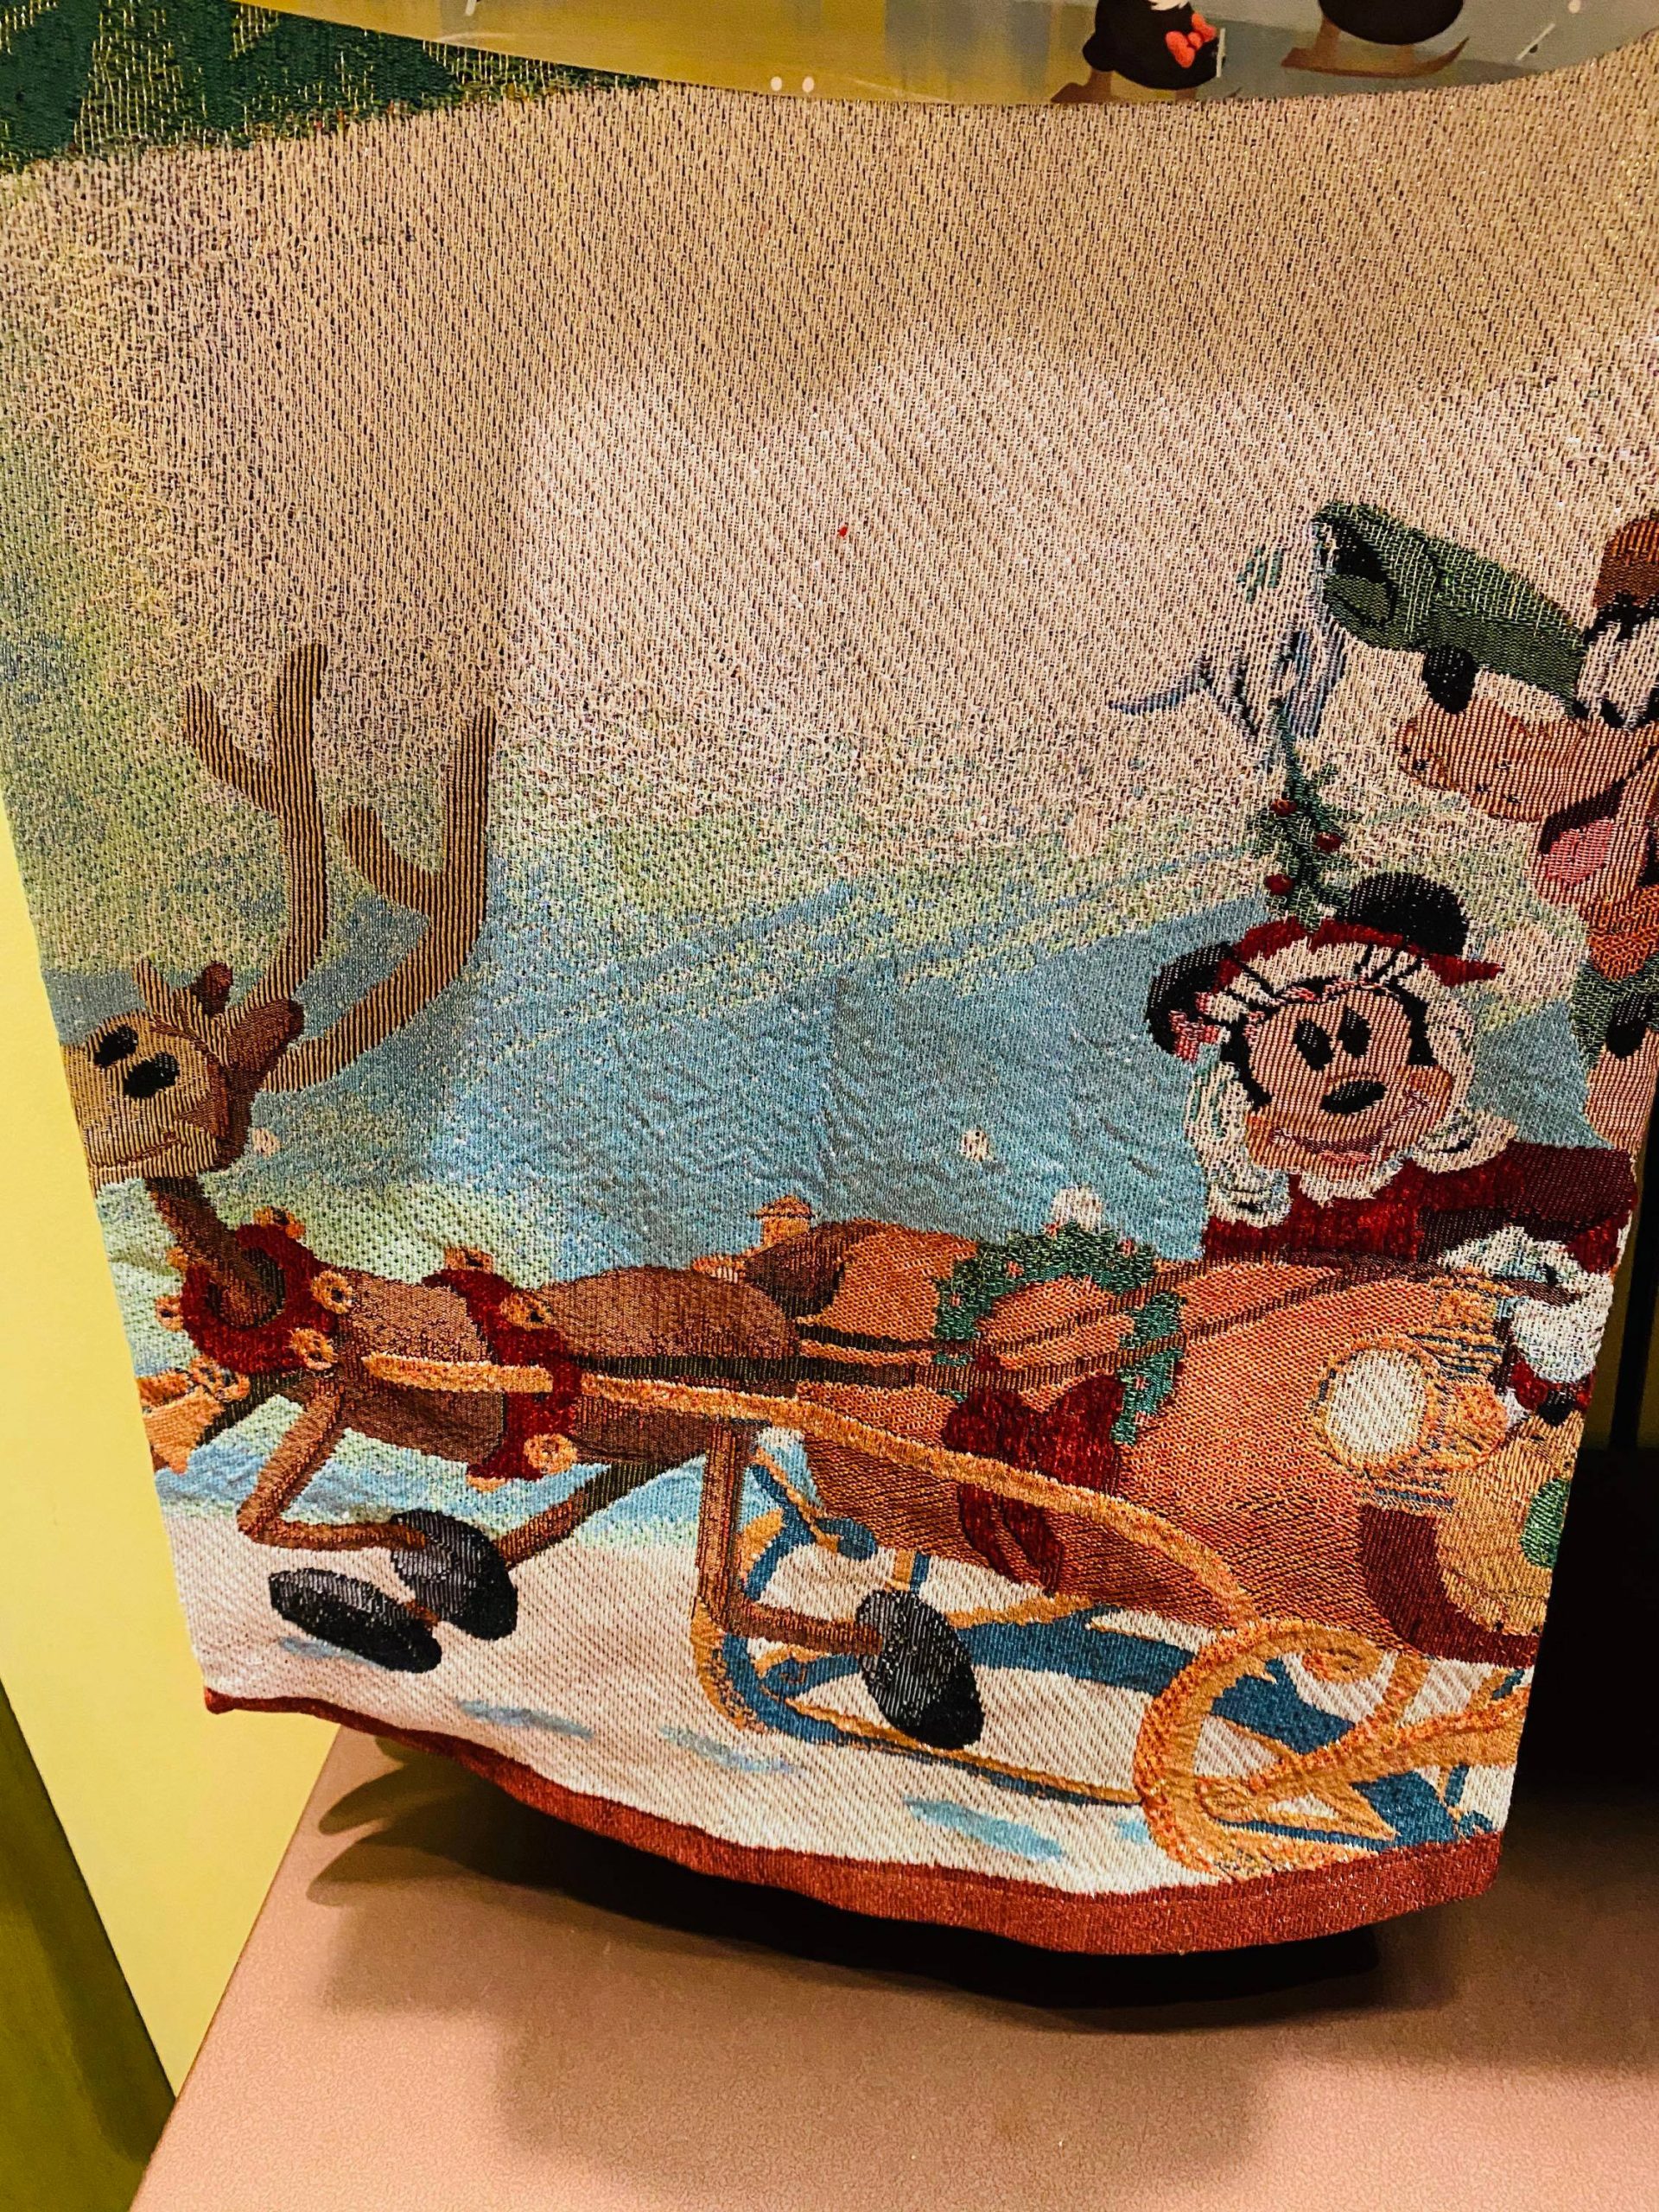 You Can Add a Touch of Disney to Your Christmas Tree With